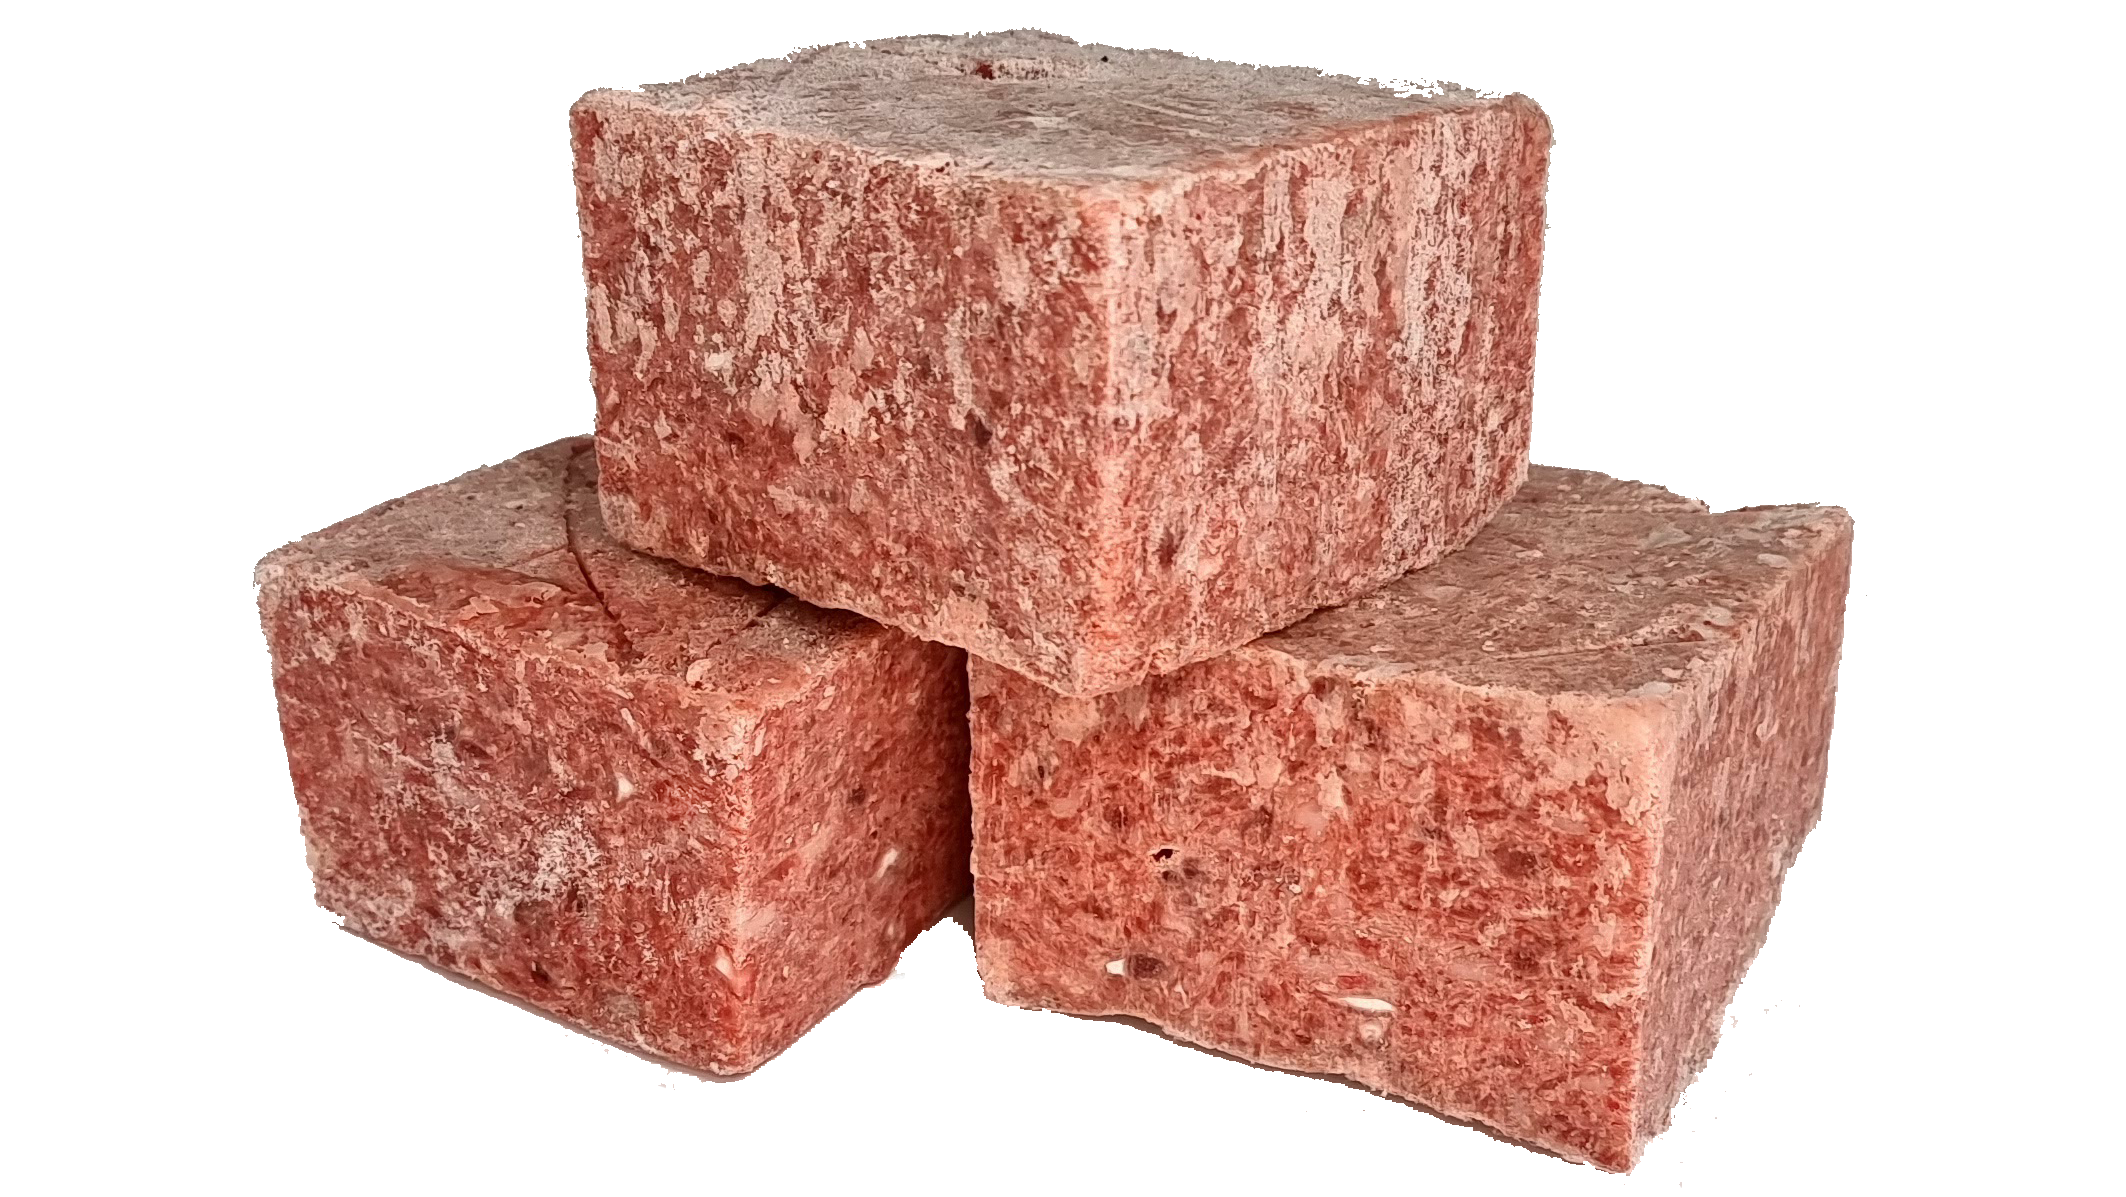 Click & Collect from BENFLEET - Minced Chicken with bone 10kgs - 10 unwrapped blocks of Raw Frozen Mince